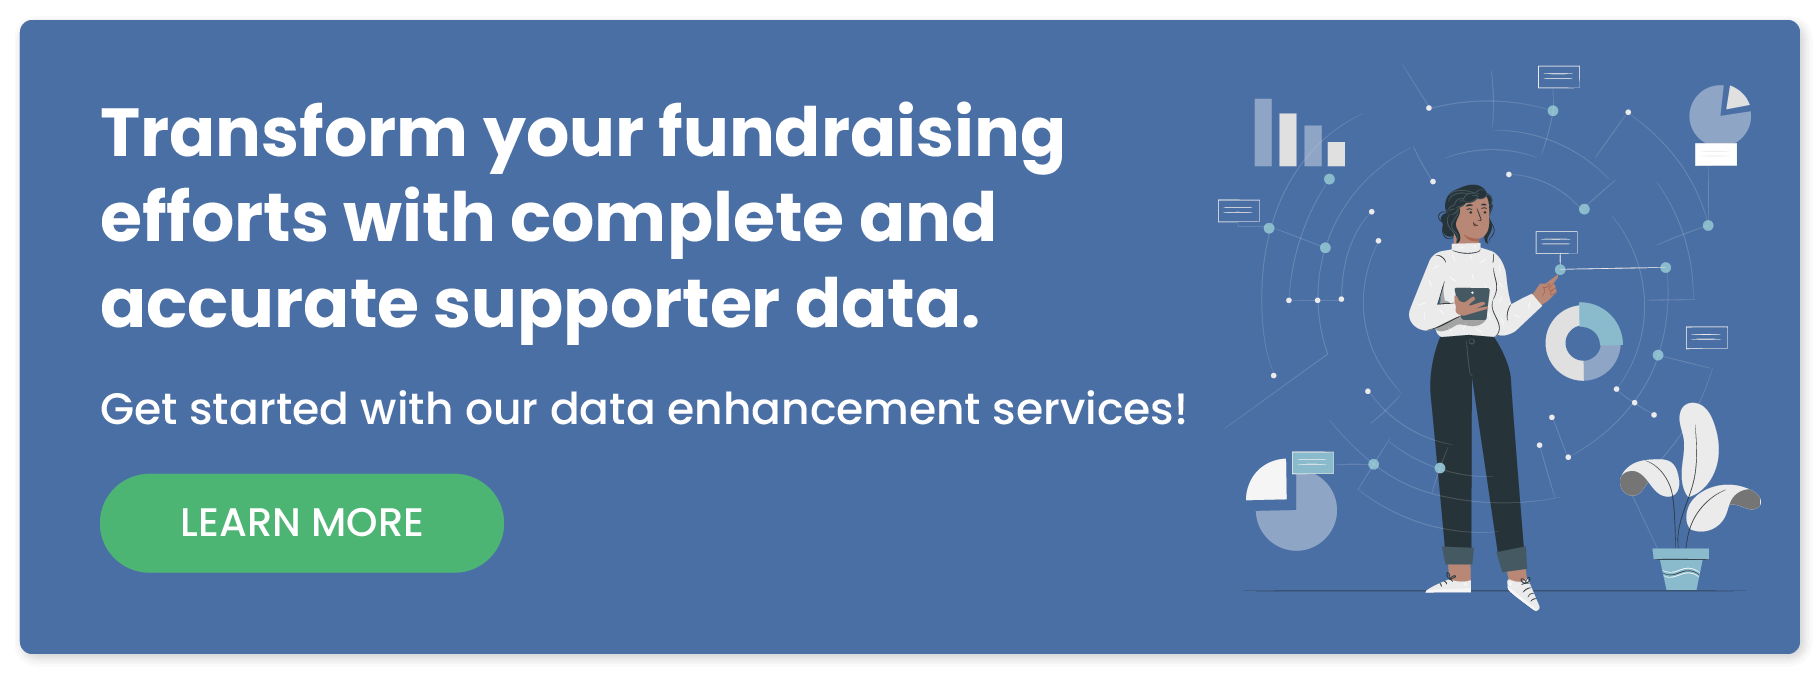 Explore our data enhancement services and learn how we can help you follow nonprofit data hygiene best practices.